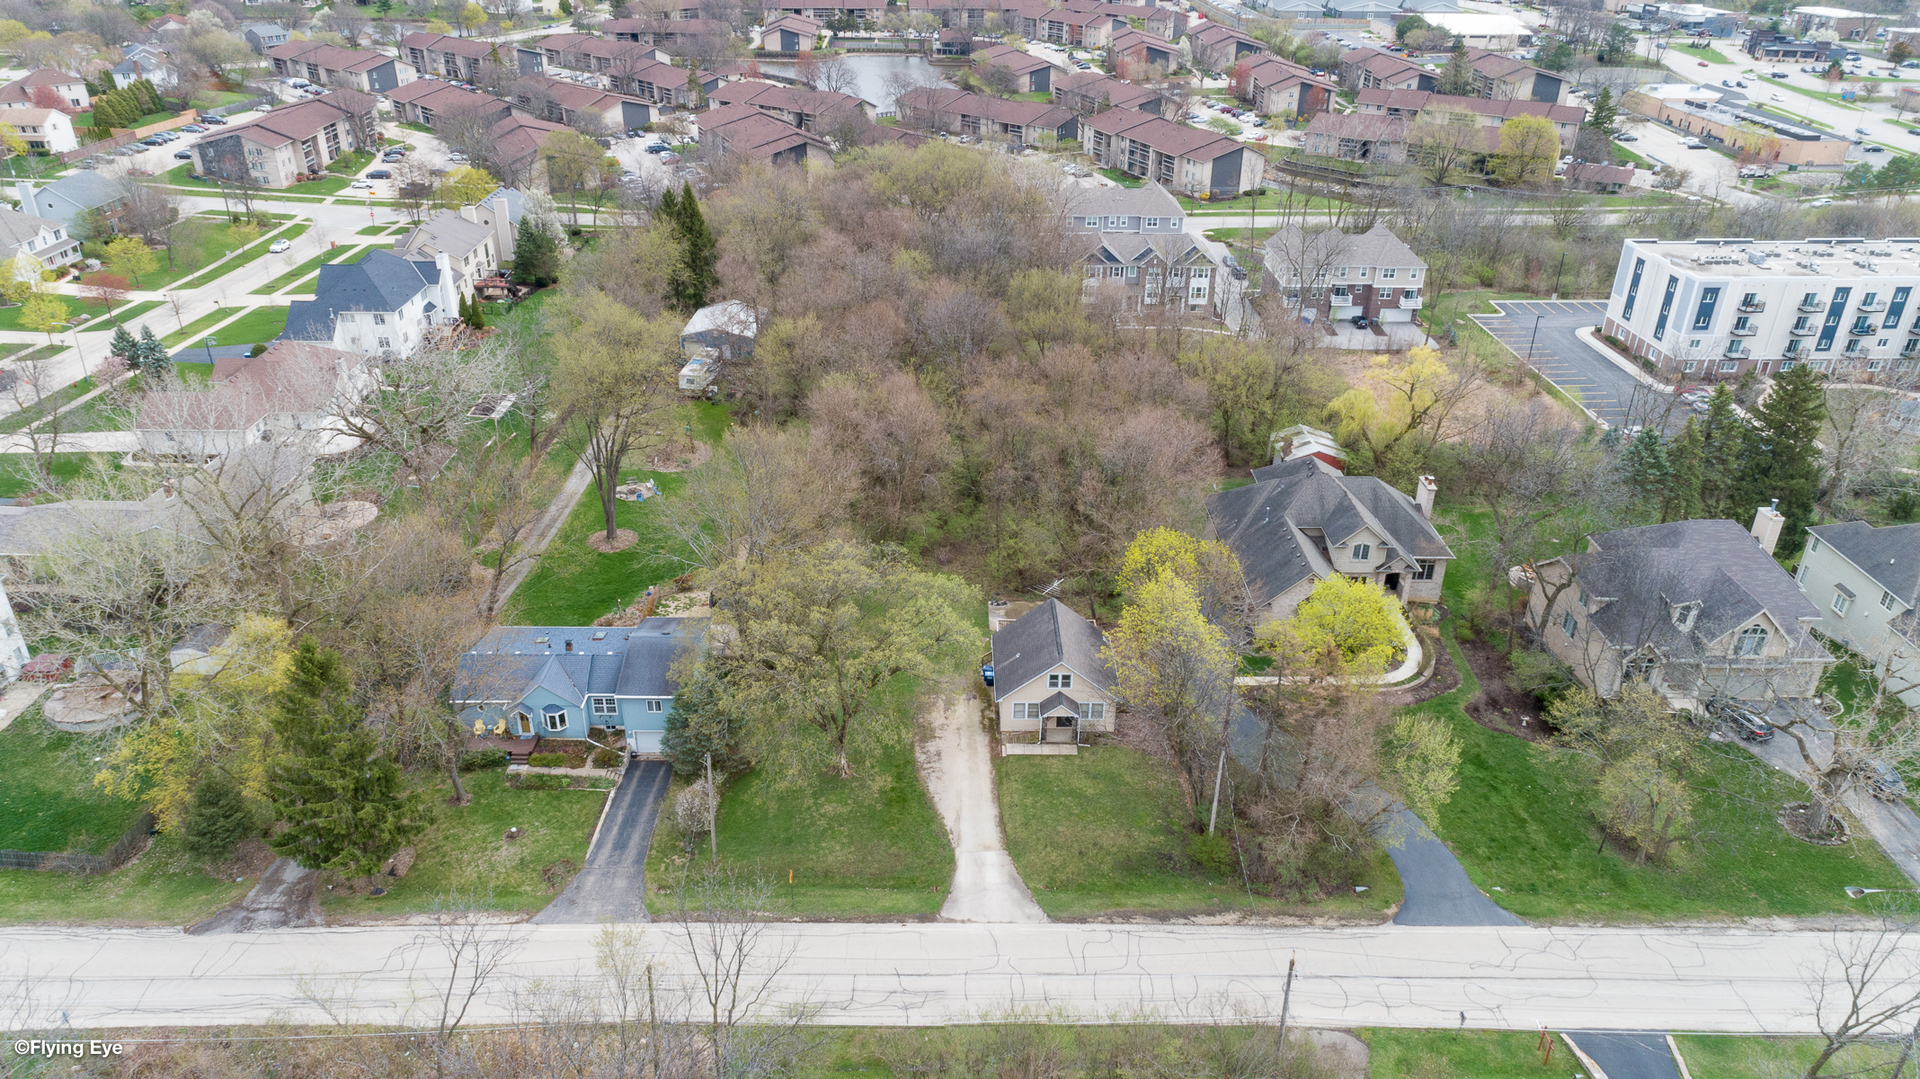 an aerial view of waterside residential houses with outdoor space